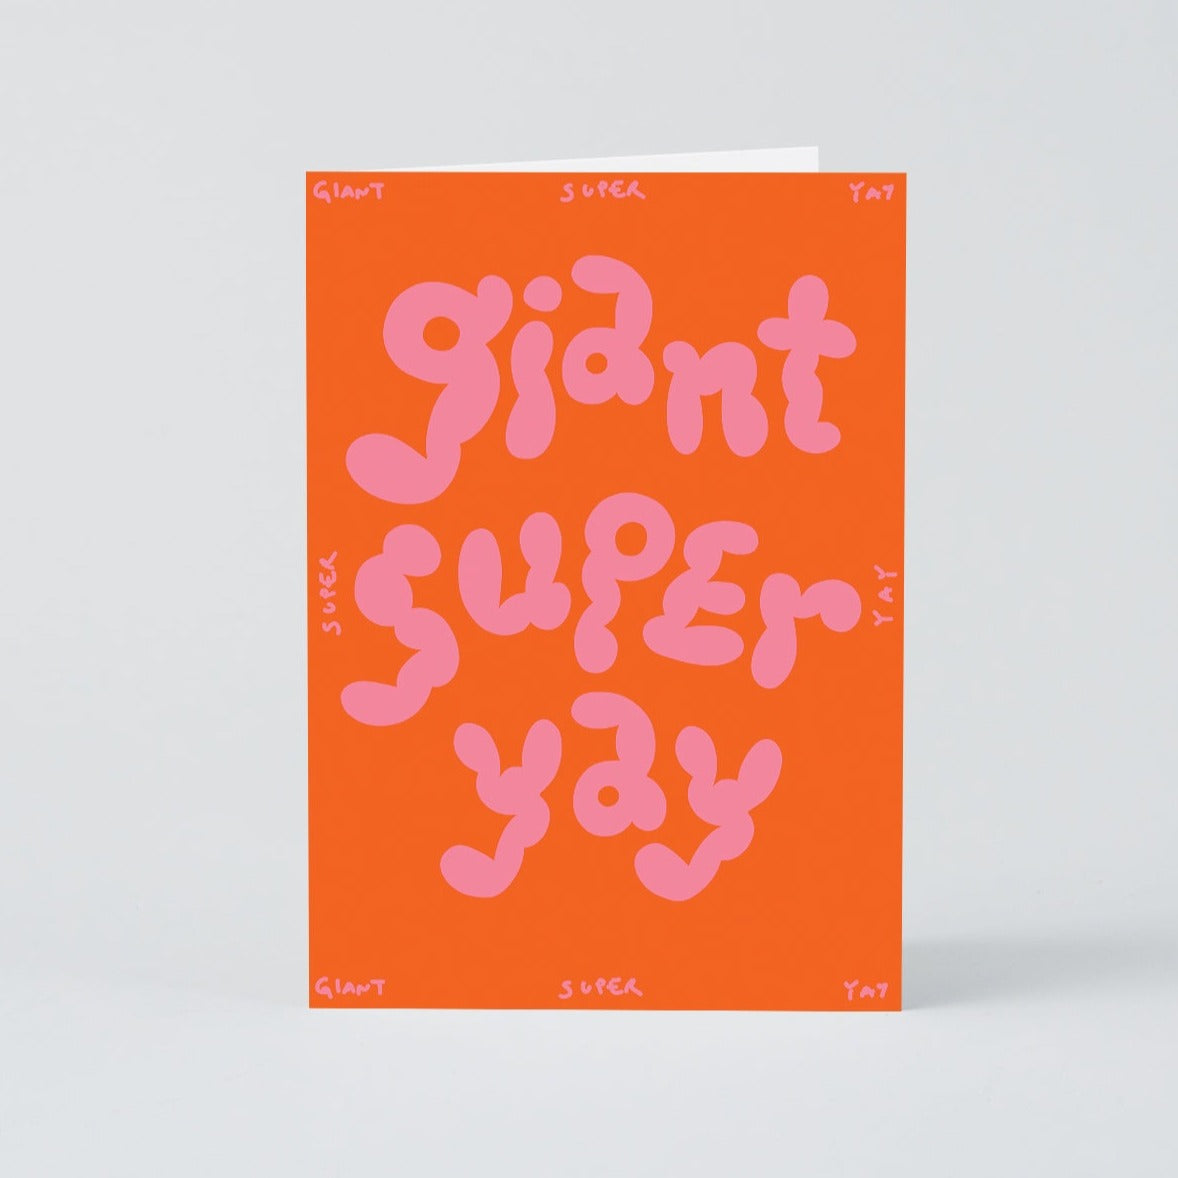 Giant Super Yay Greetings Card